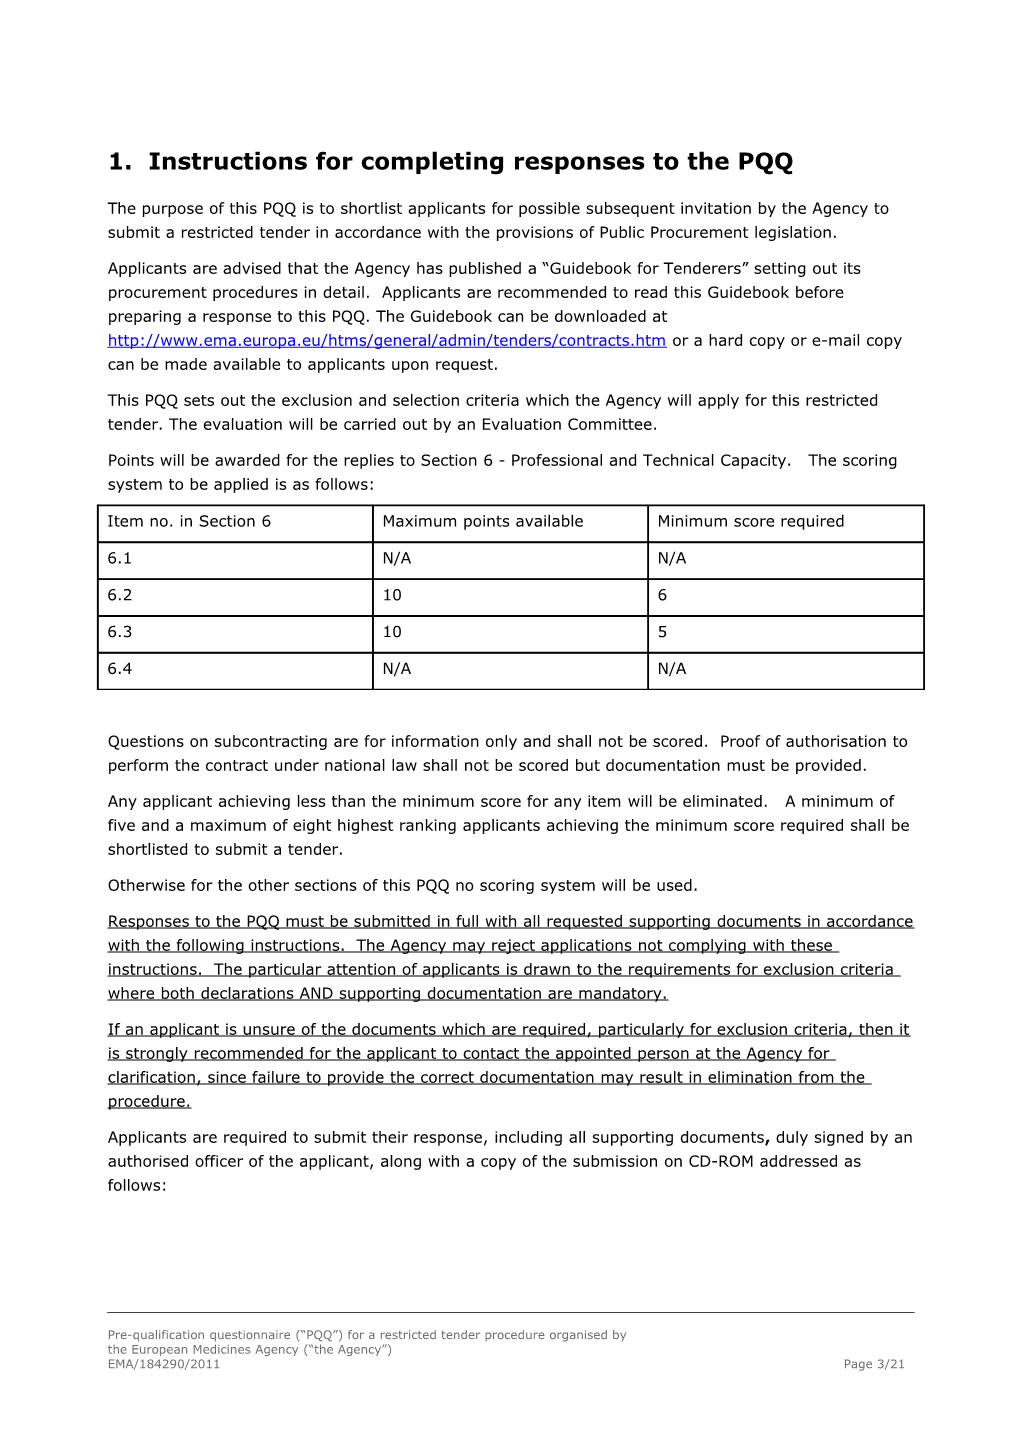 Pre-Qualification Questionnaire with Scoring and with Exclusion Proof